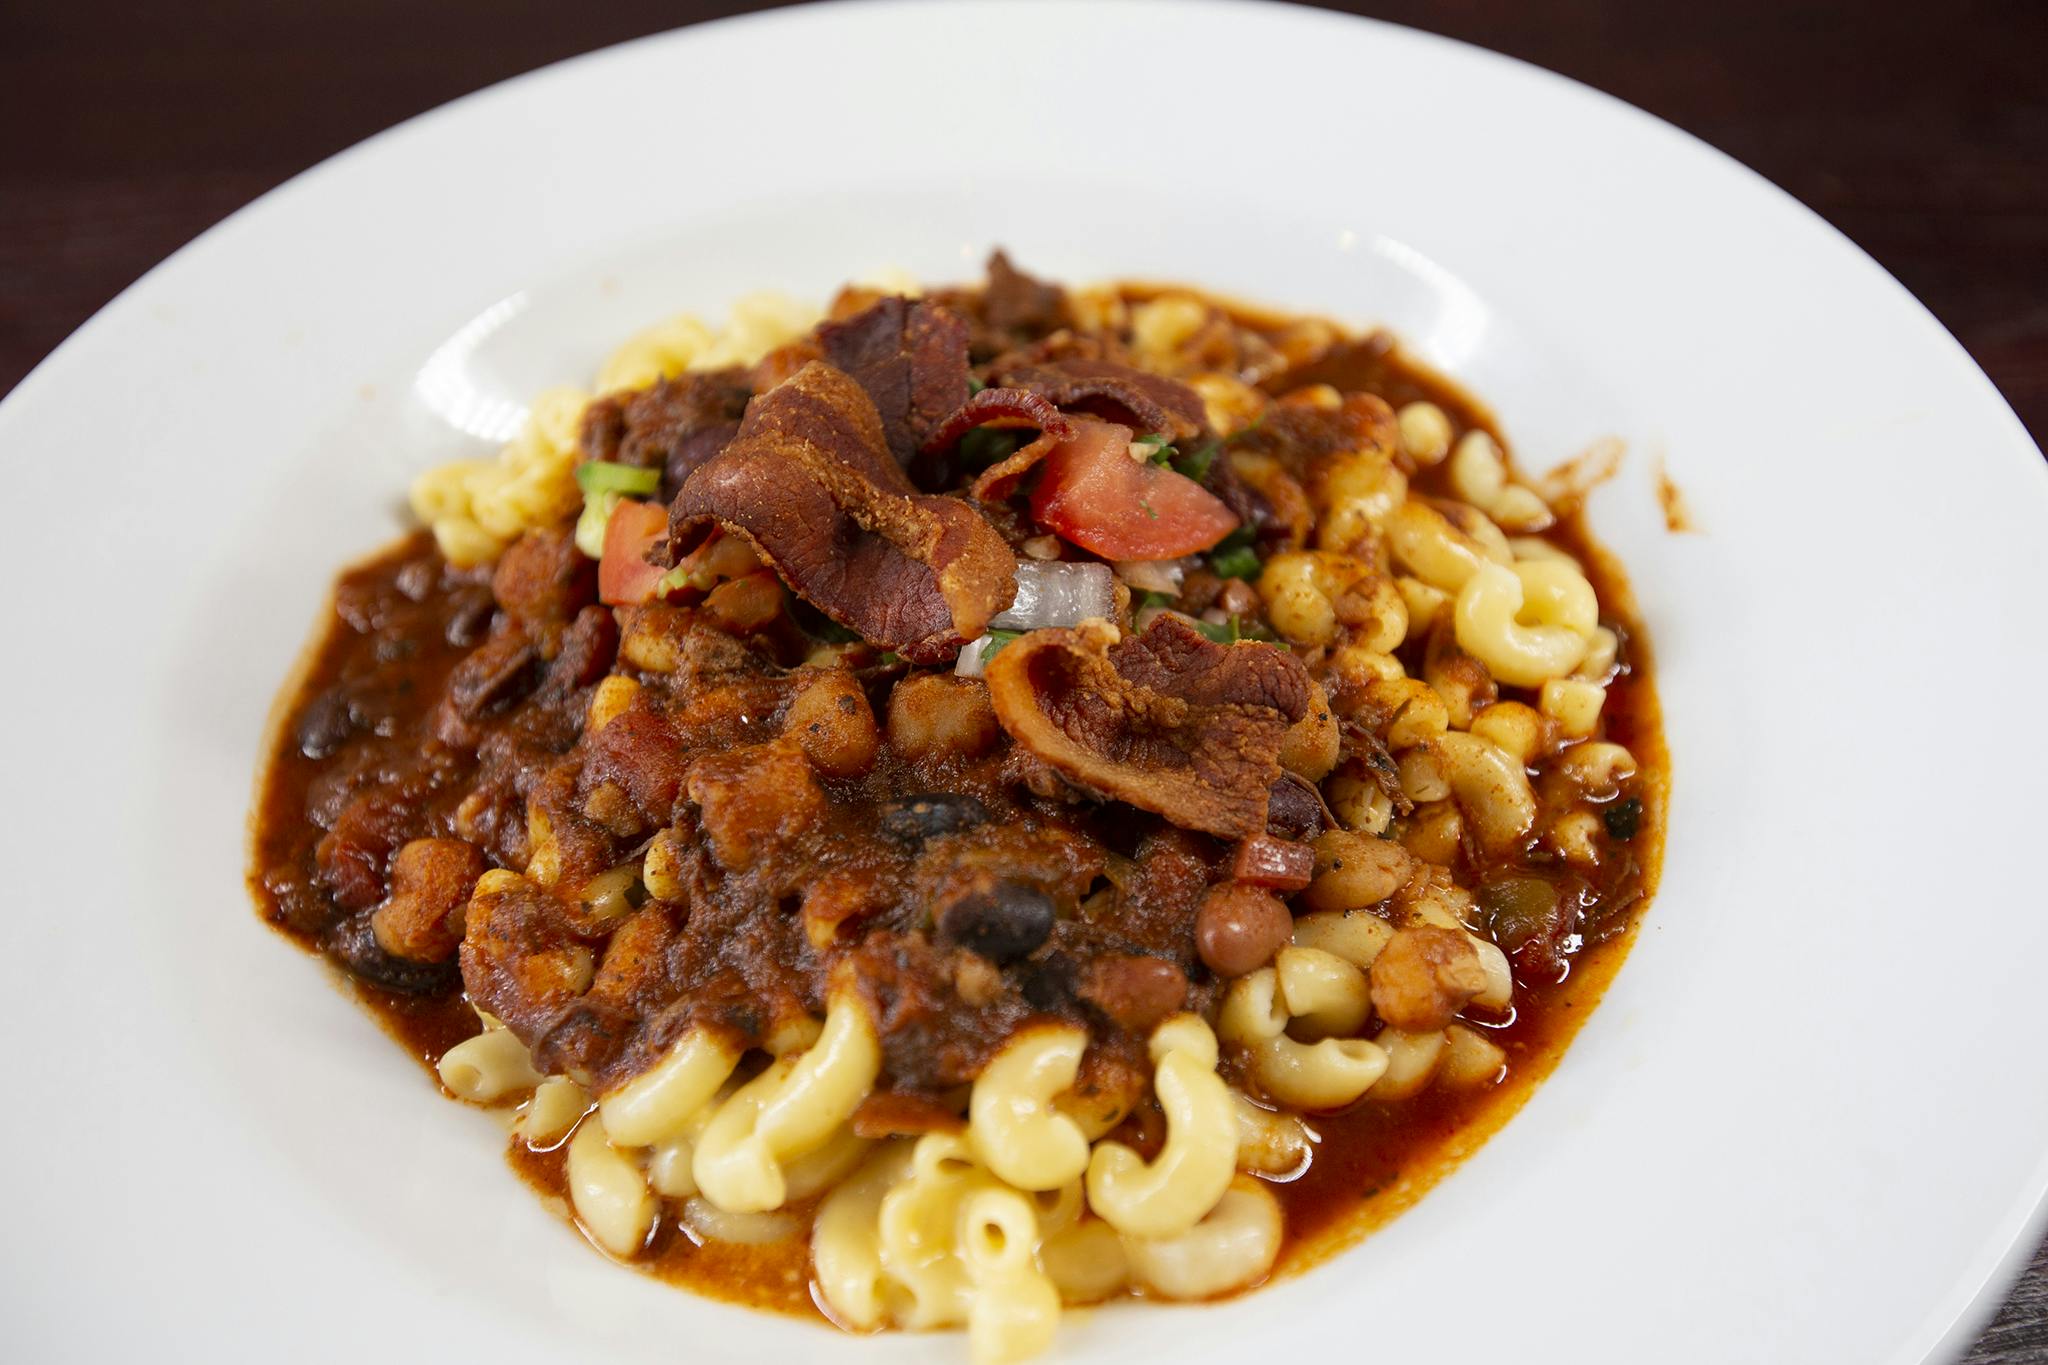 Chili Mac from Firehouse Grill - Chicago Ave in Evanston, IL